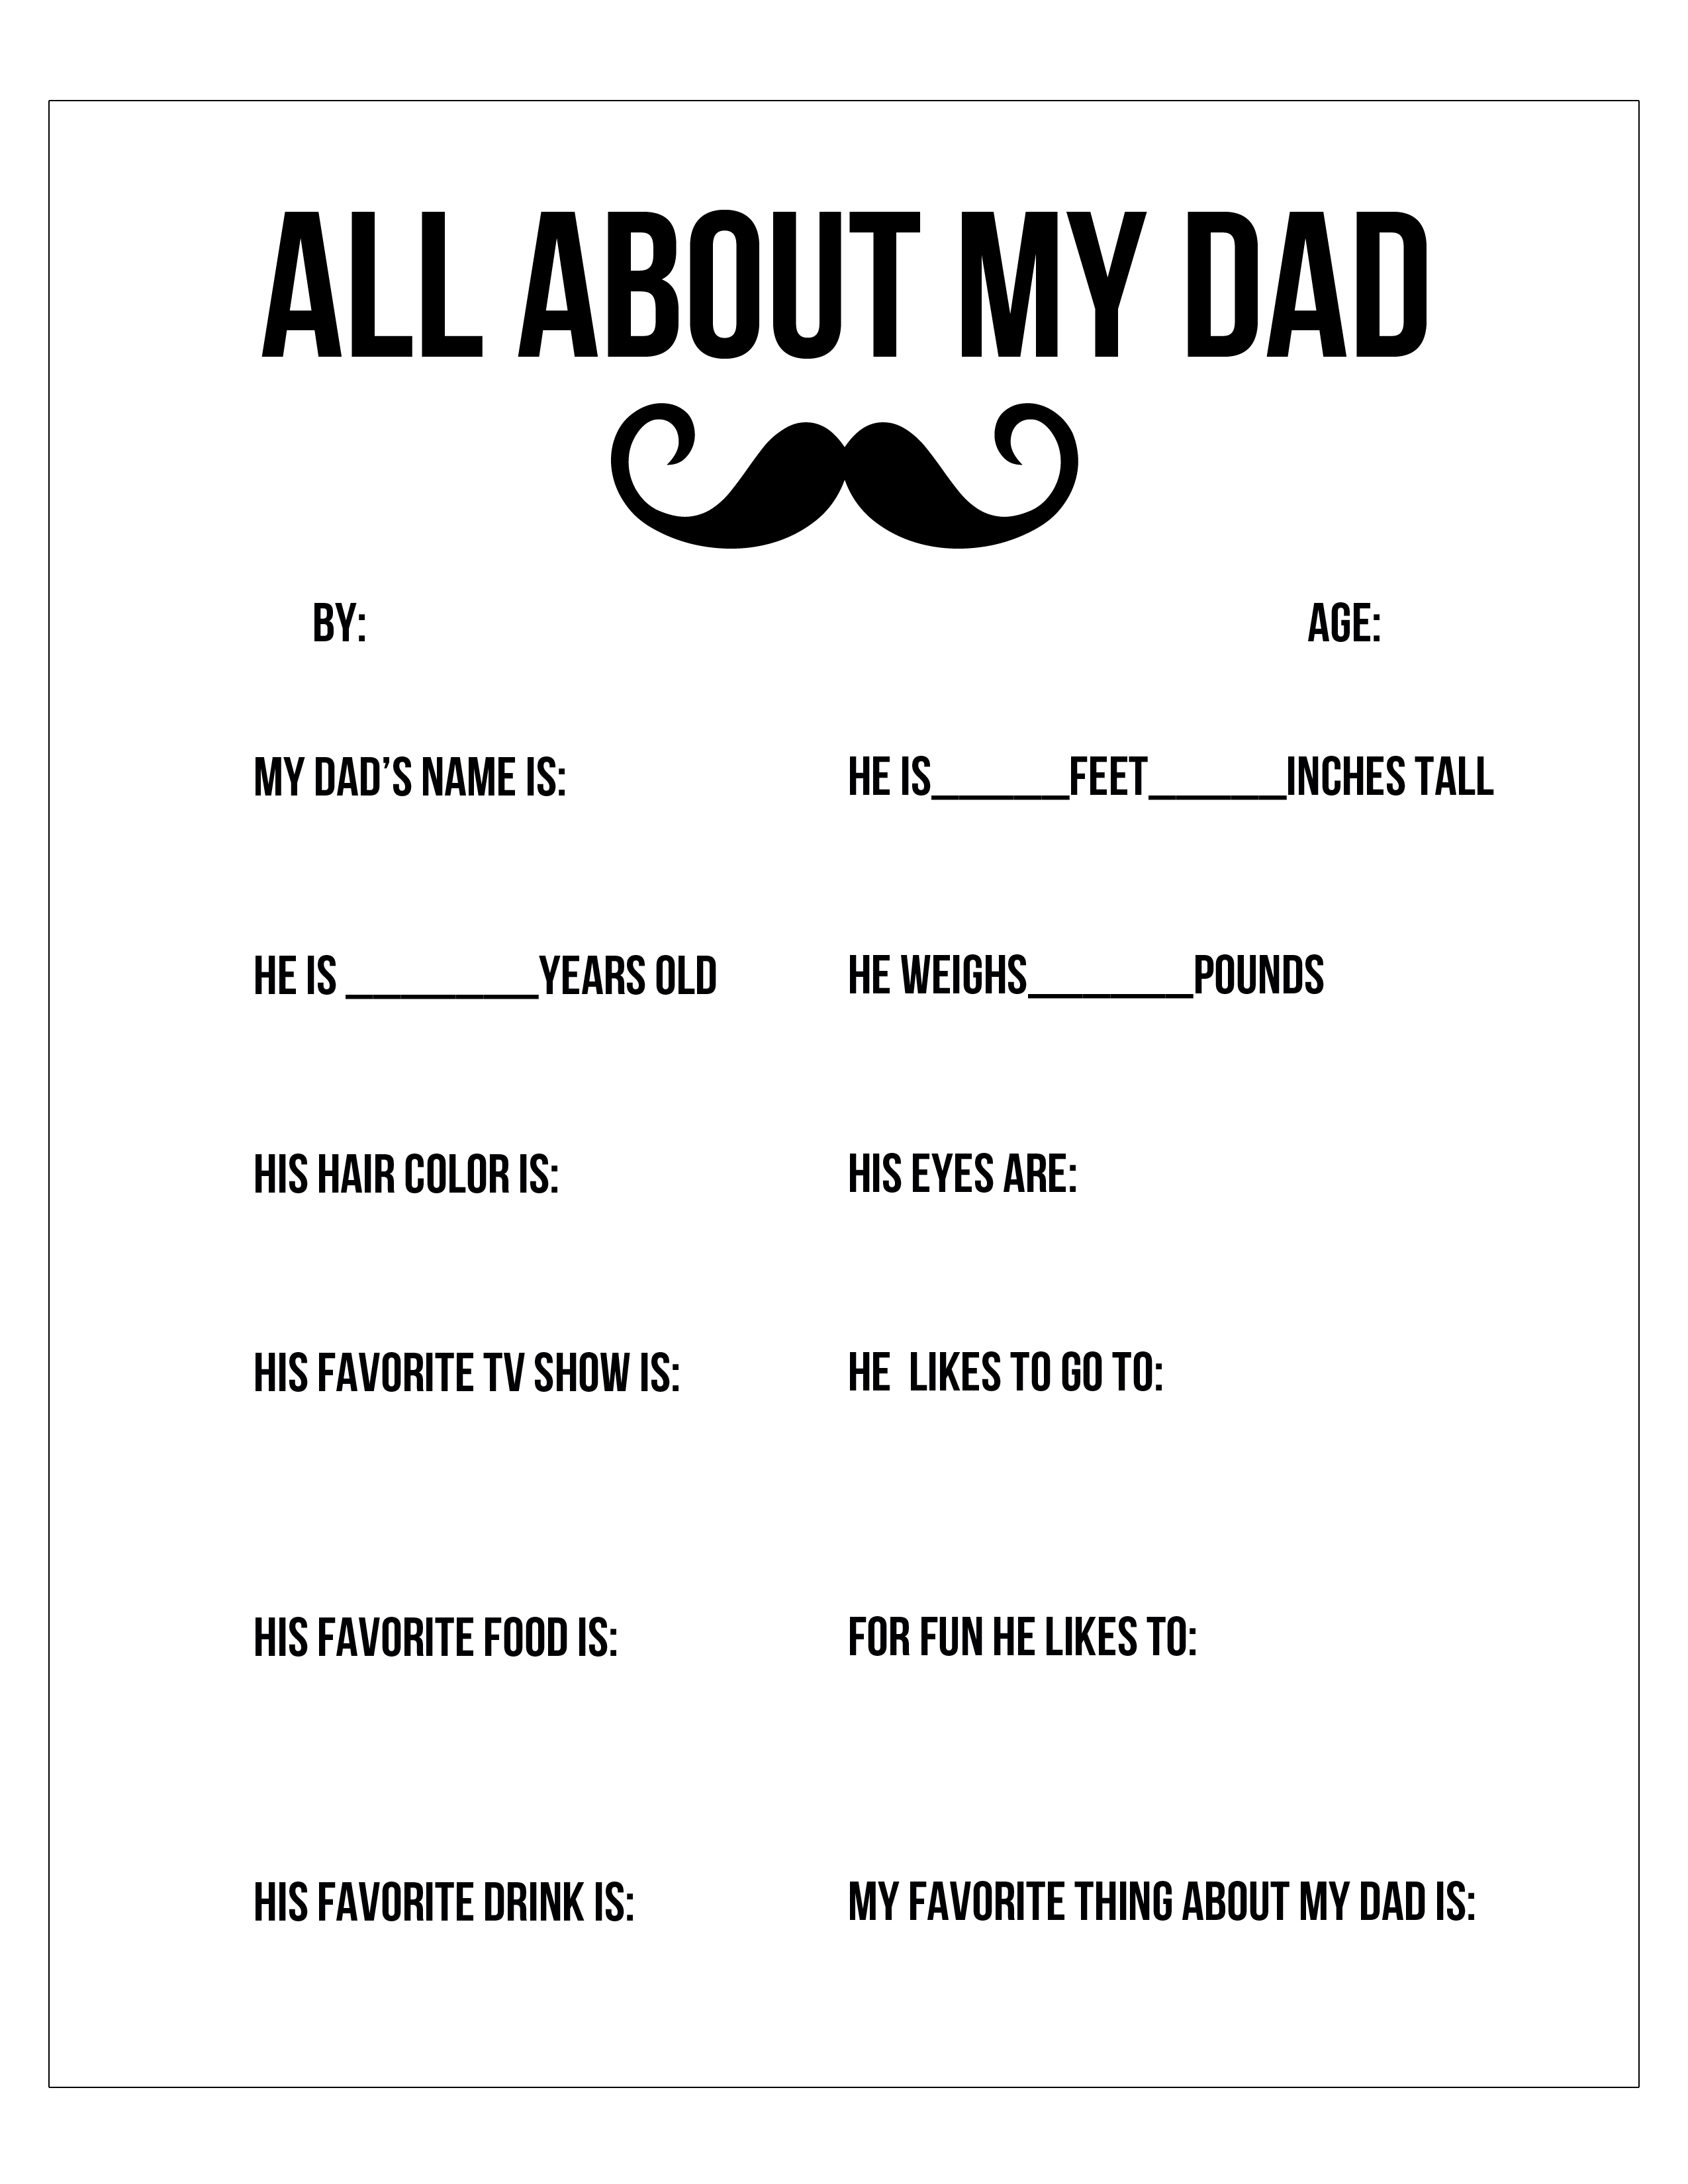 15 Best Images of All About Me Birthday Worksheet All About Me